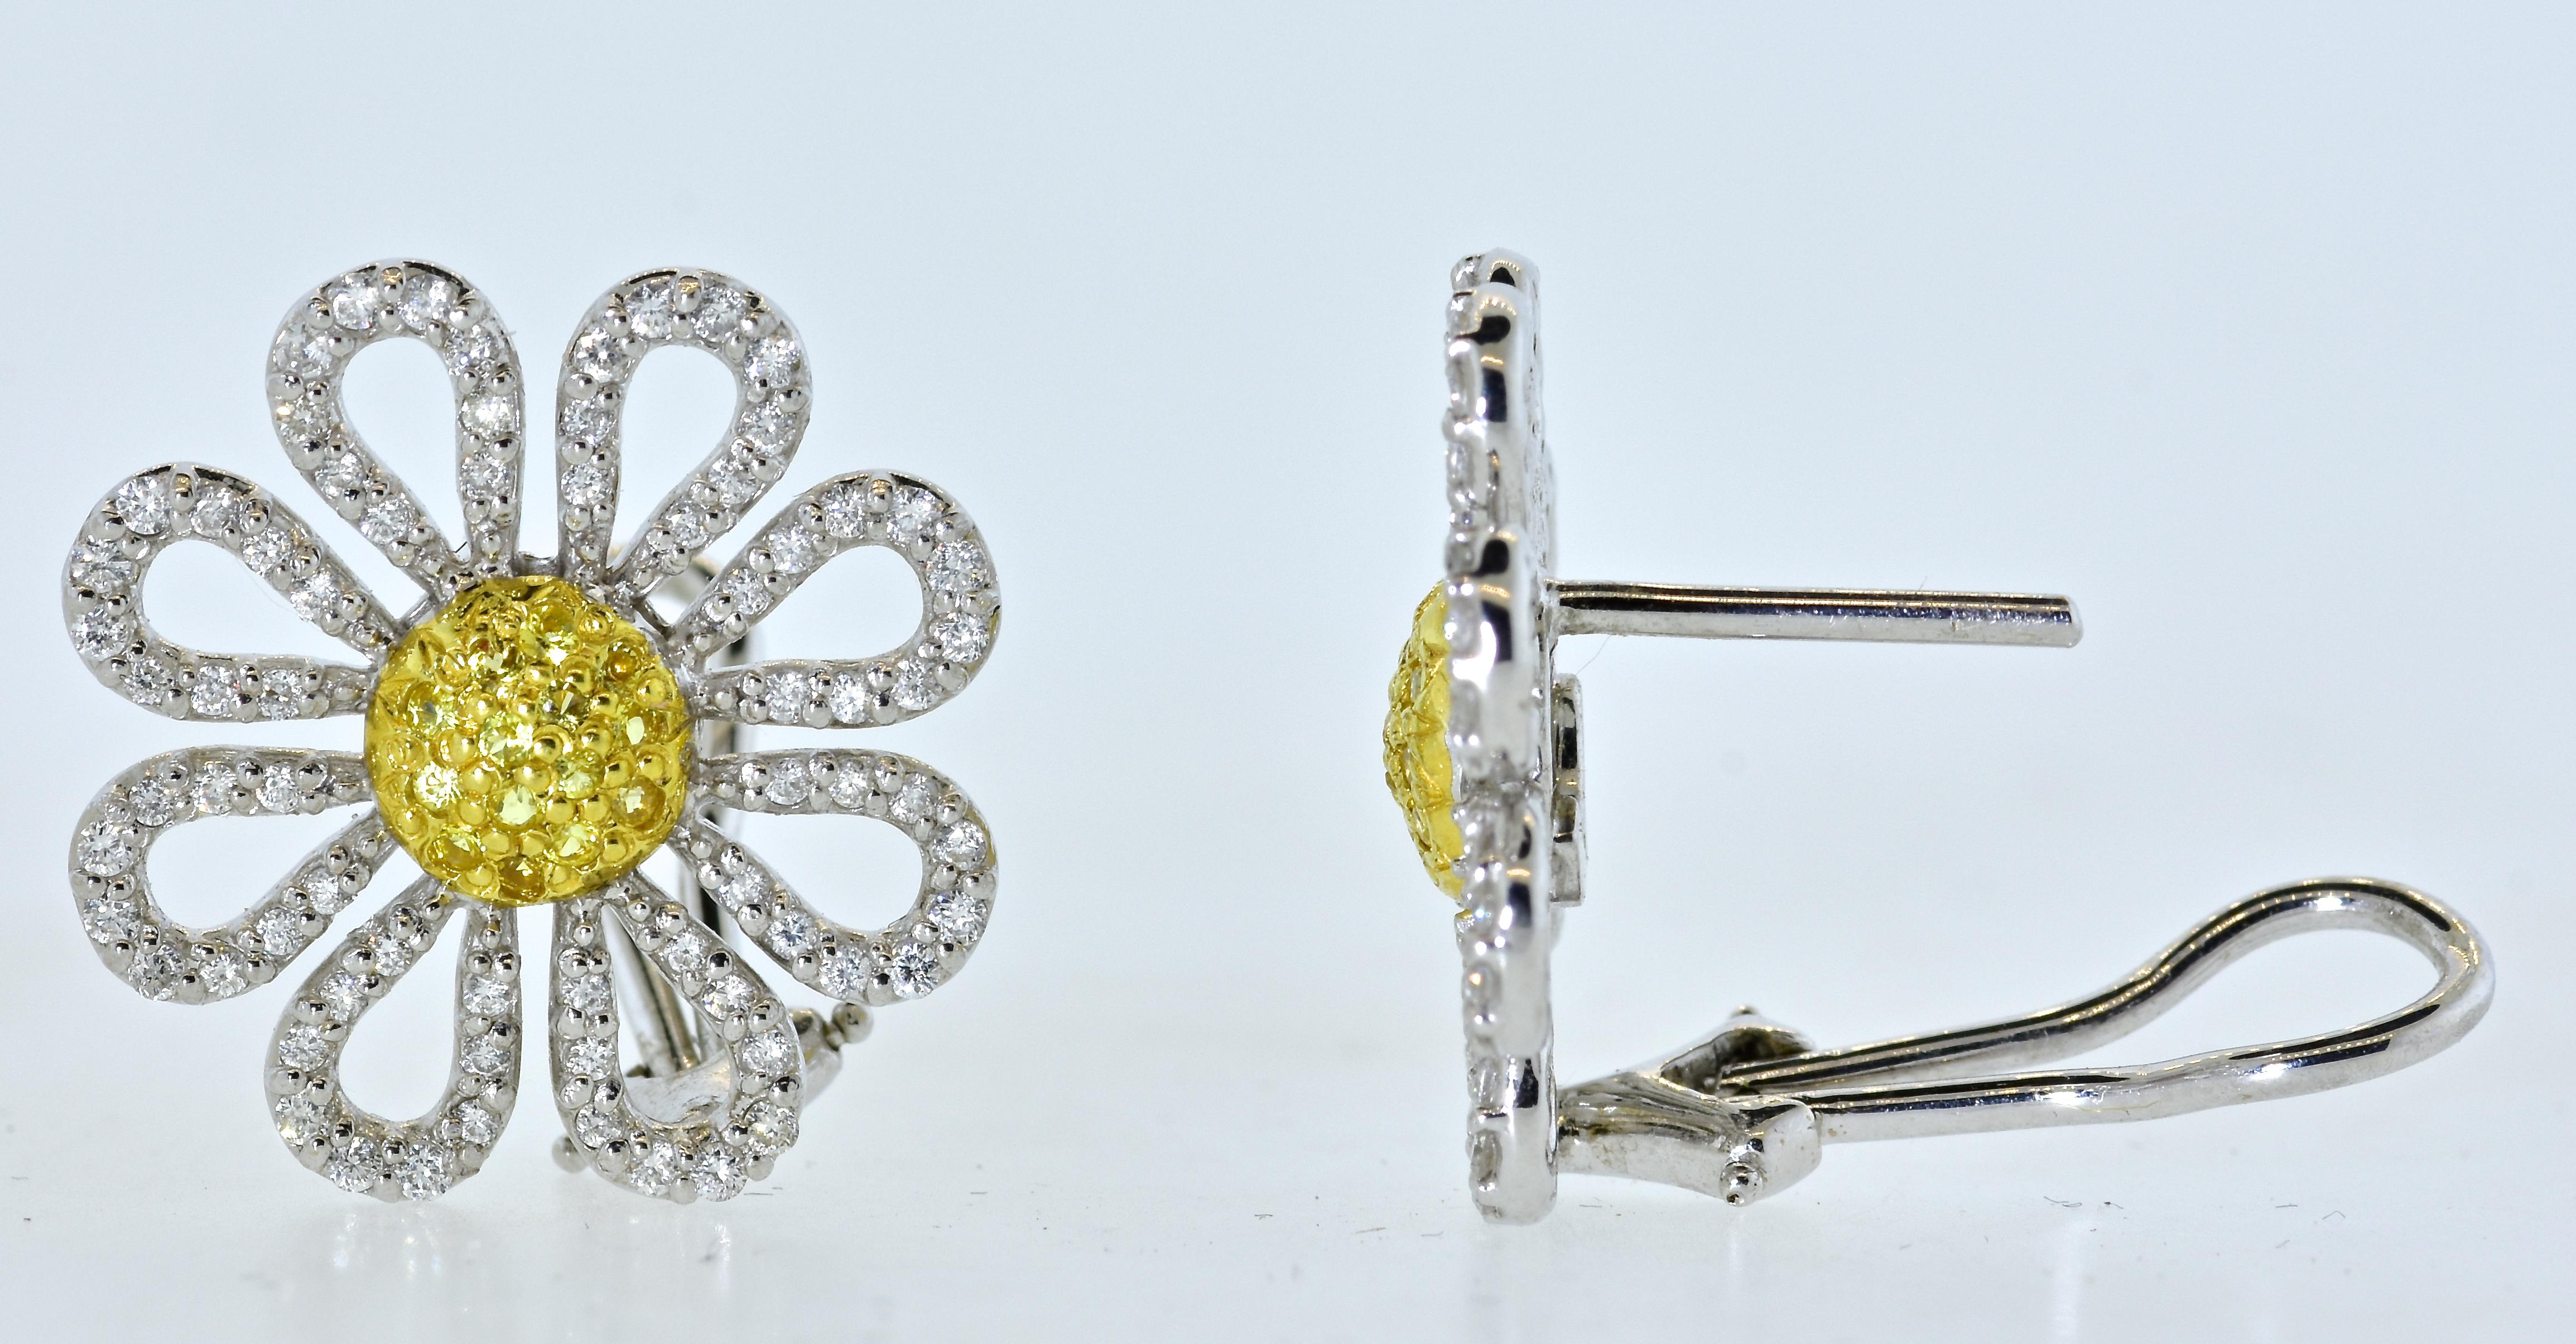 Roberto Coin's daisy motif earrings composed of 28 natural fancy intense/vivid yellow brilliant cut diamonds  and 144 white brilliant cut diamonds all near colorless (H), and very slightly included.  The estimated diamond weight is 1.75 cts.  The